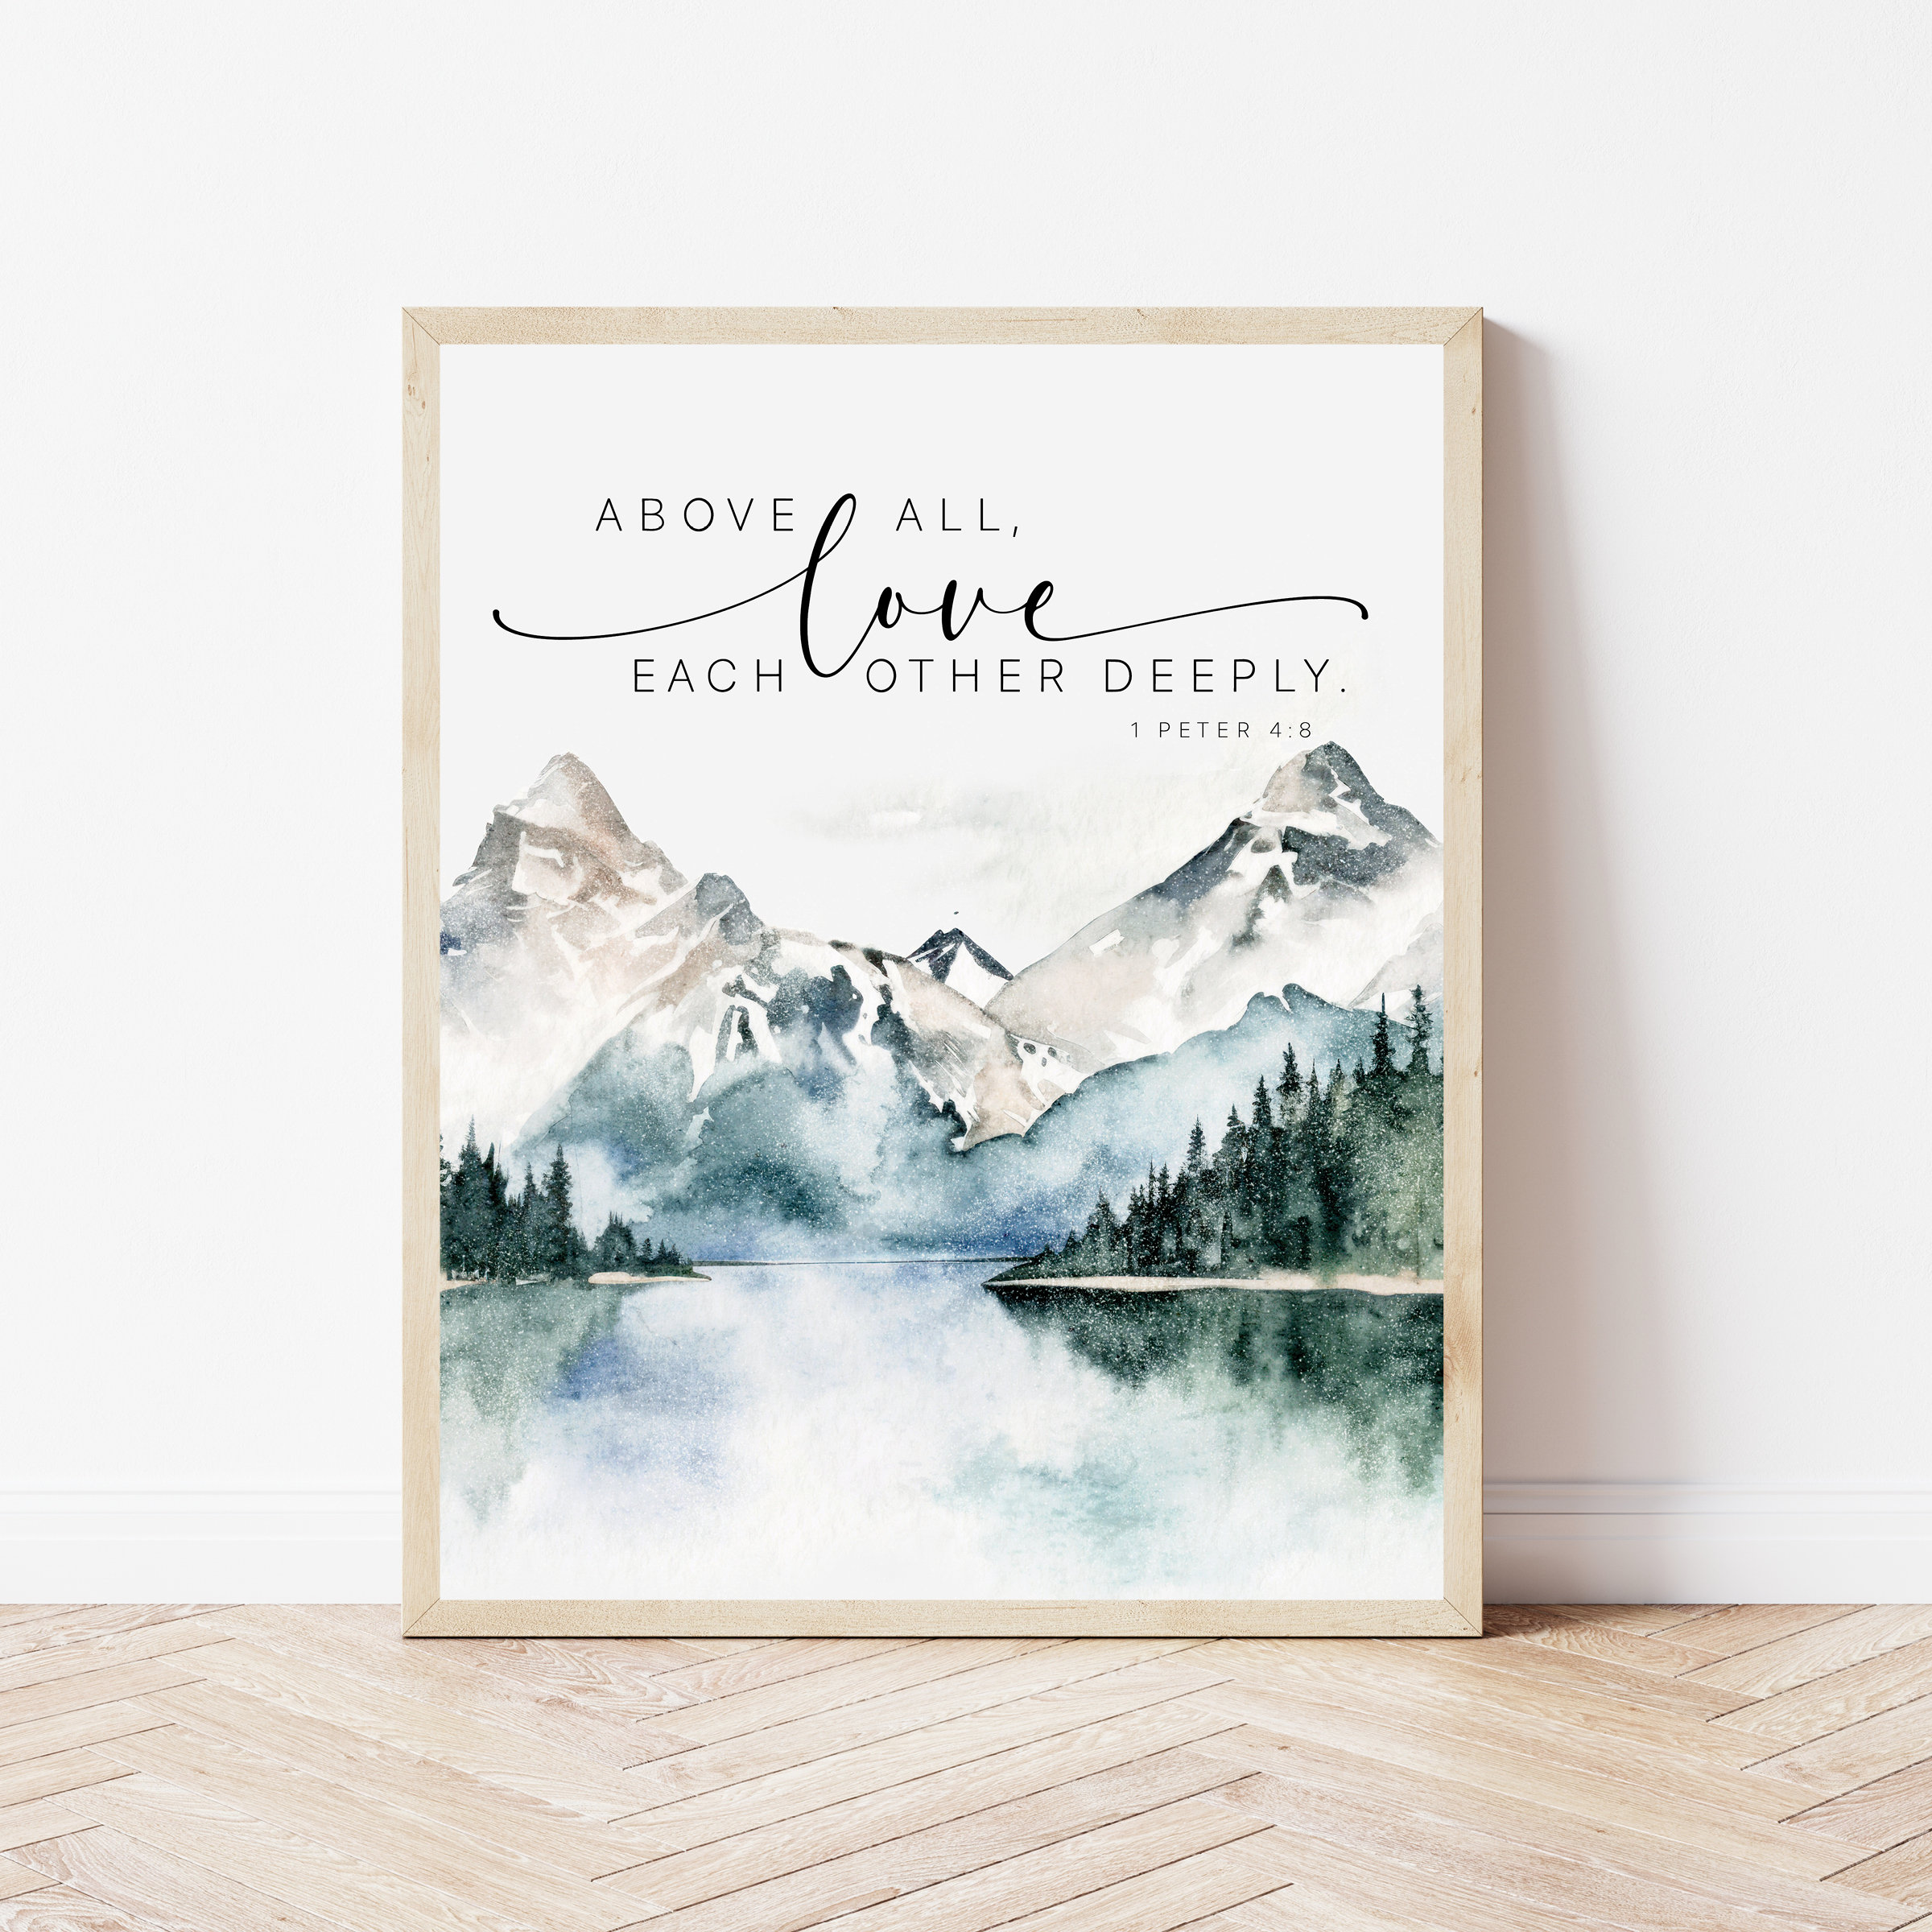 Taylor Swift Lyrics. Bedroom Wall Art. Song Lyric Print. Lover Lyrics.  Above Bed Decor. All's Well That Ends Well To End Up With You